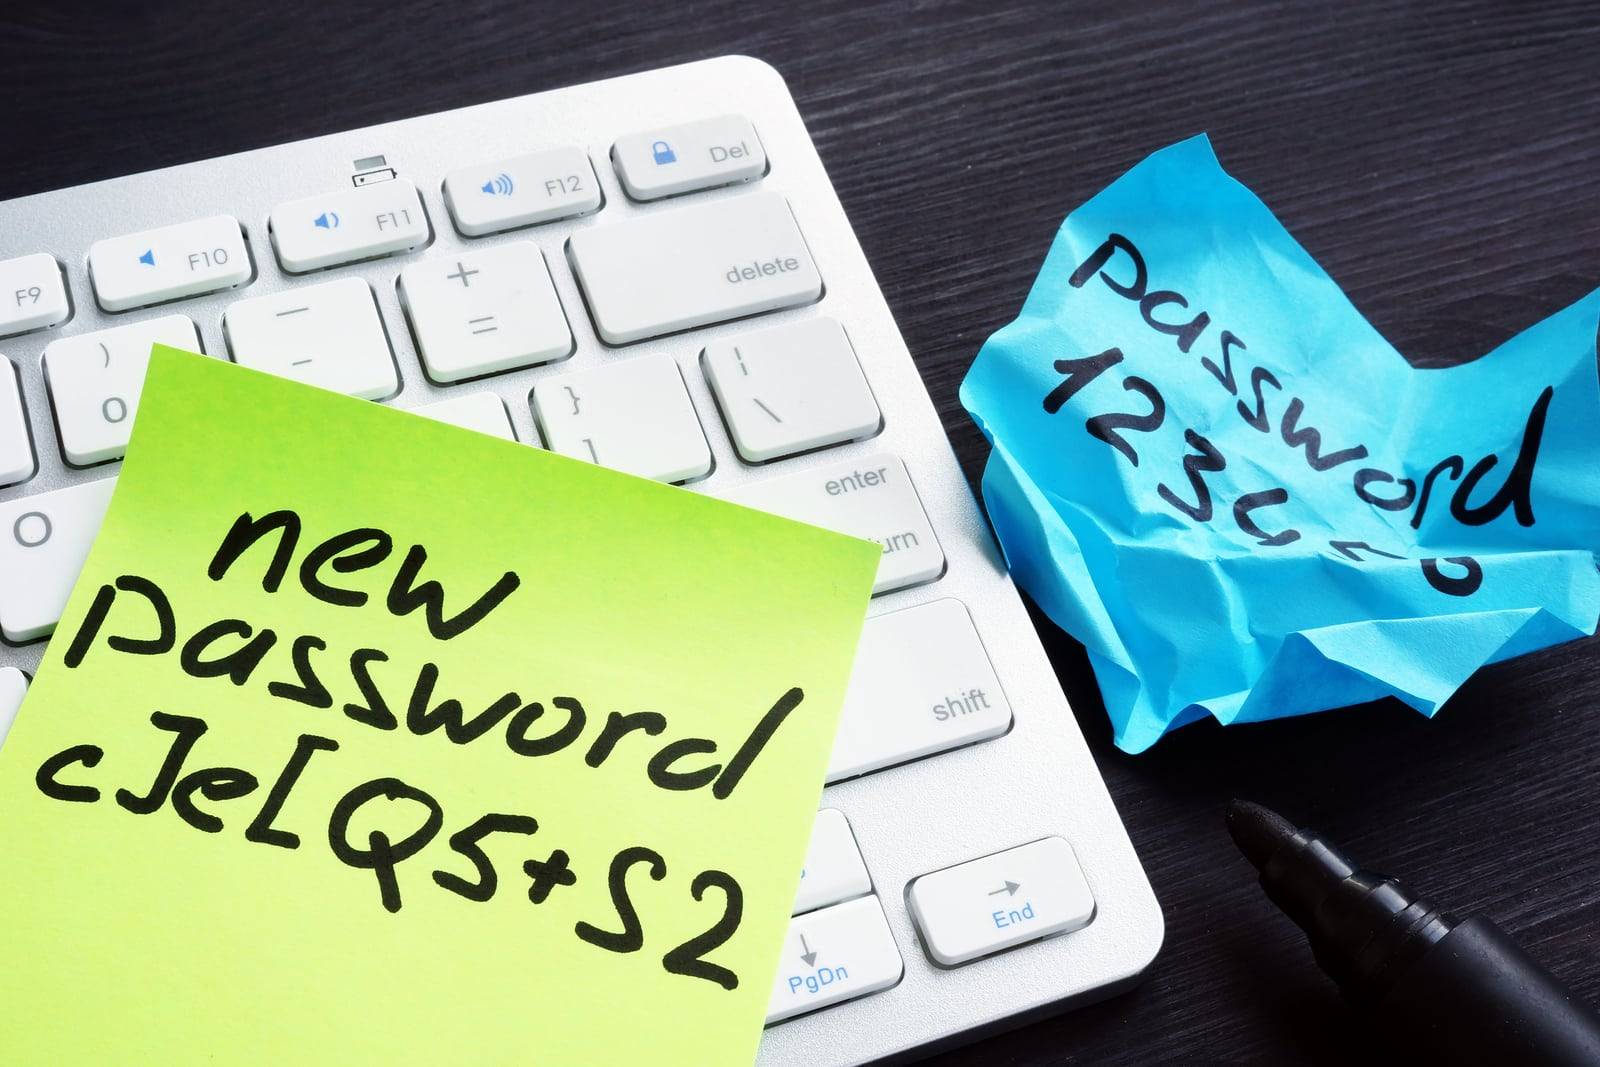 Strong and weak password